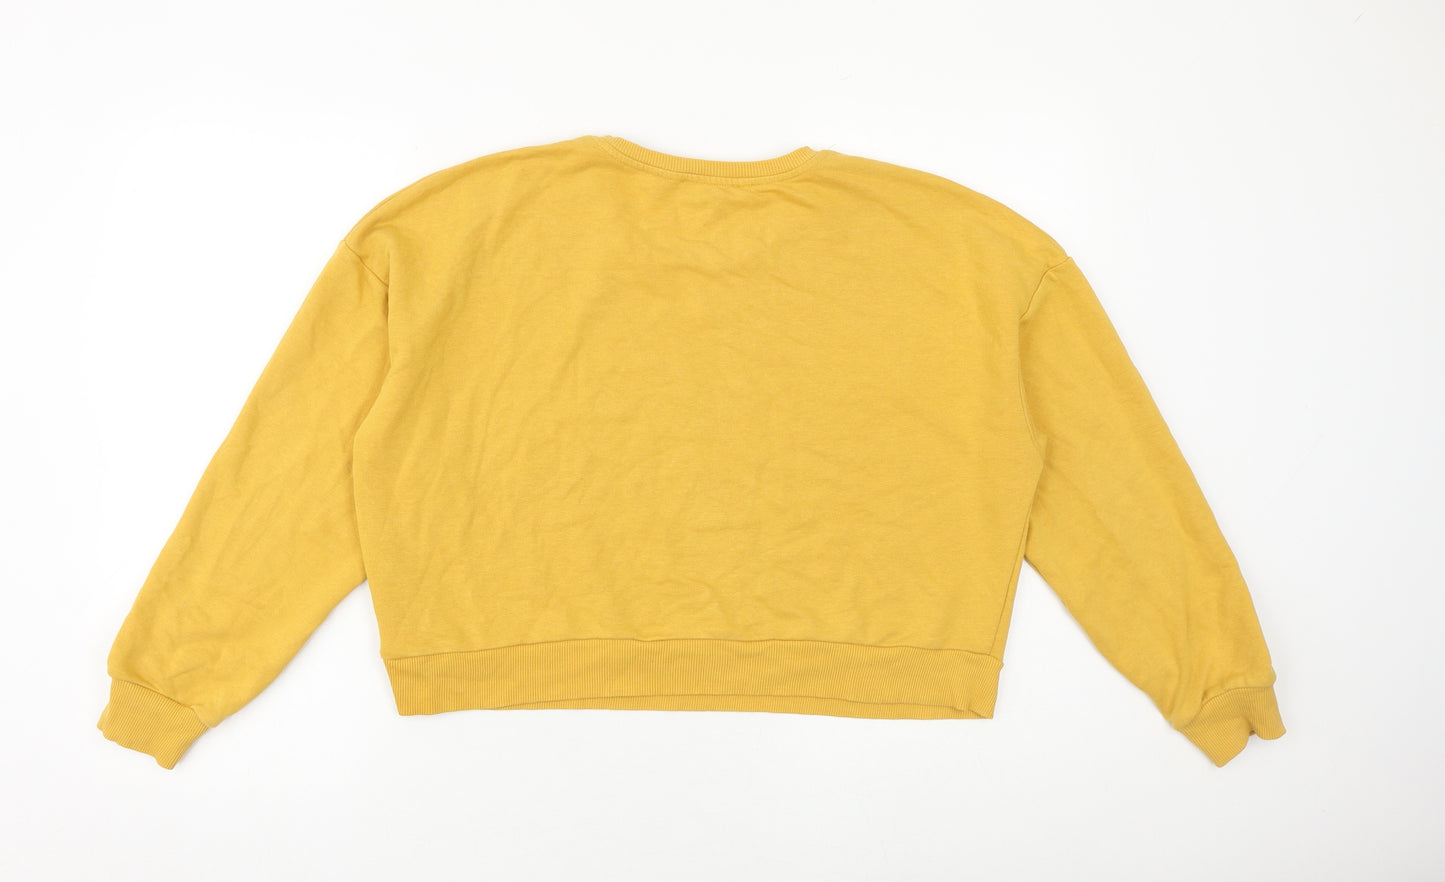 New Look Womens Yellow Cotton Pullover Sweatshirt Size 12 Pullover - Detroit League